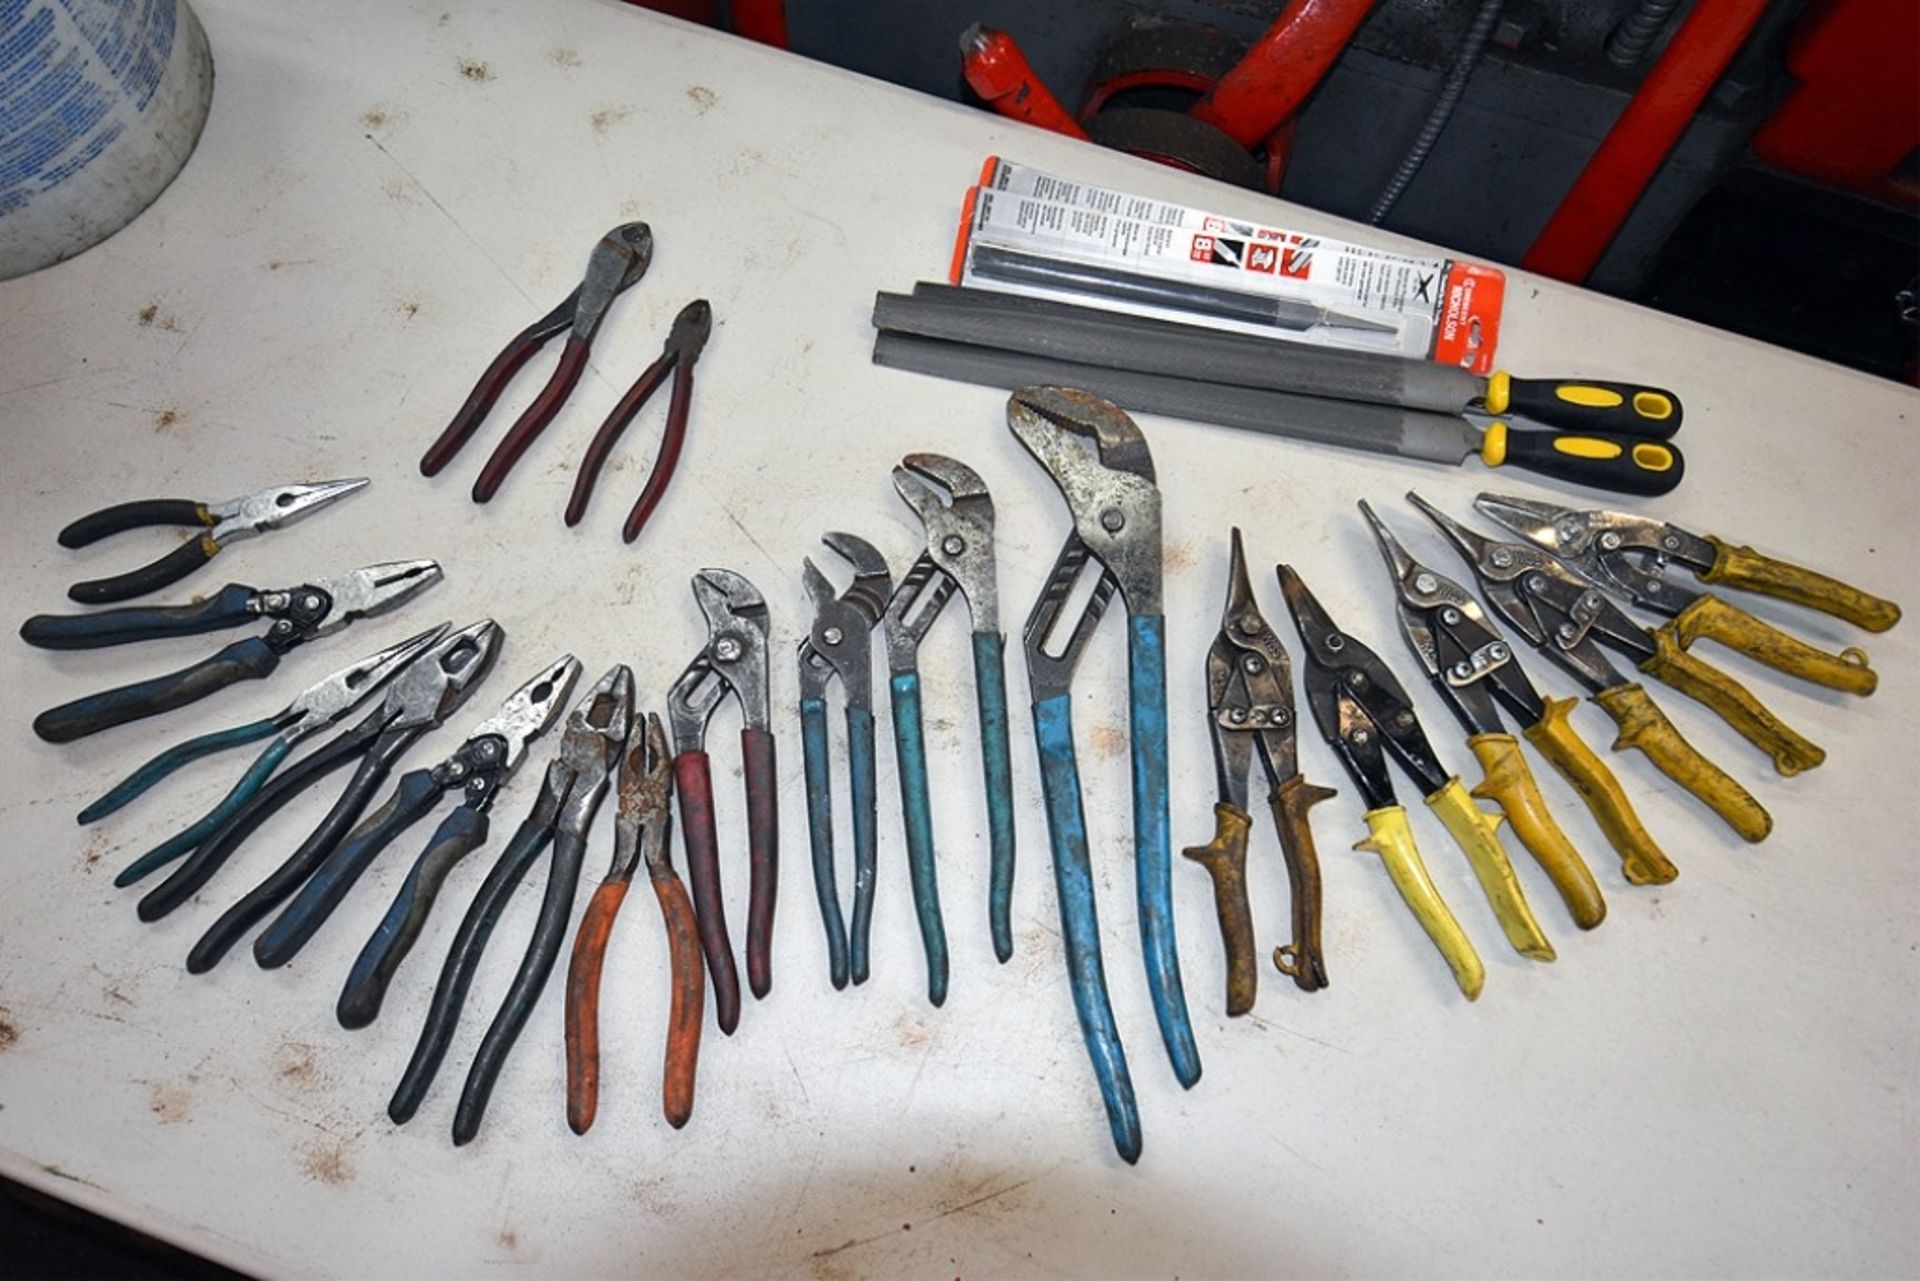 Channel Locks, Shears, and Files